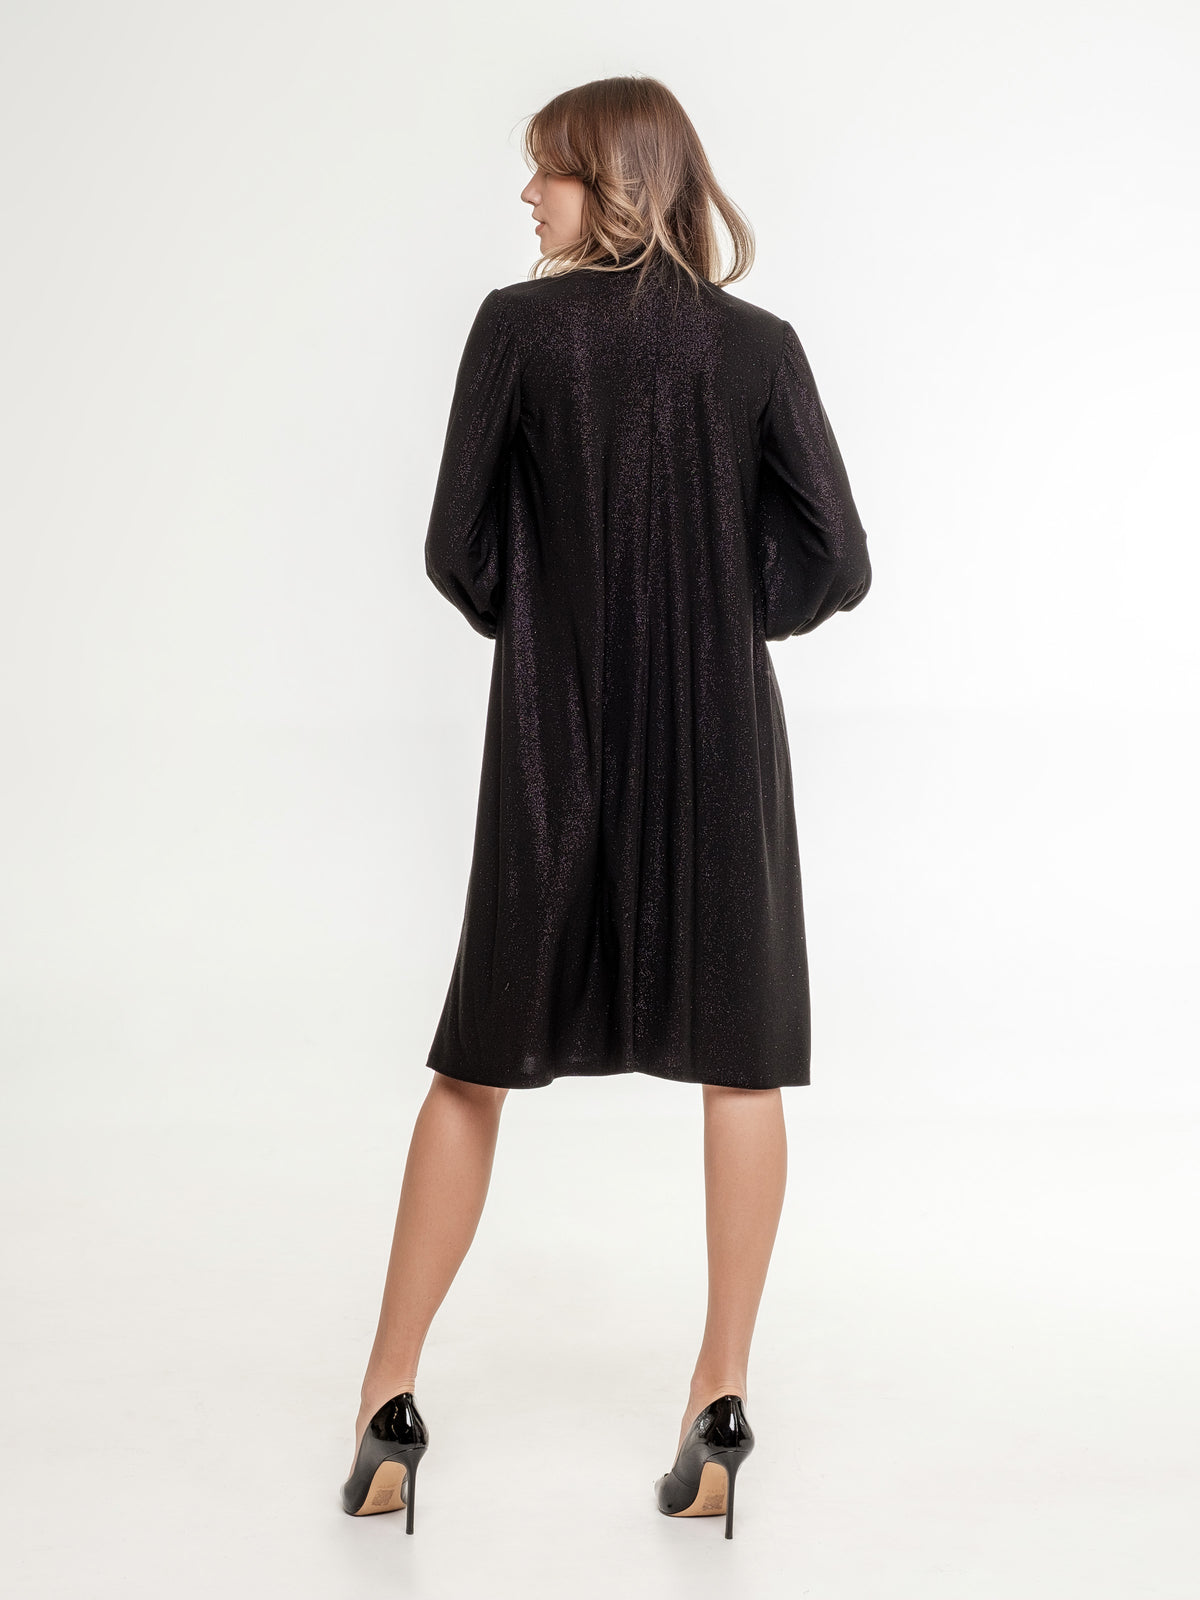 short_glossy_black_dress_with_high_neck_line back view